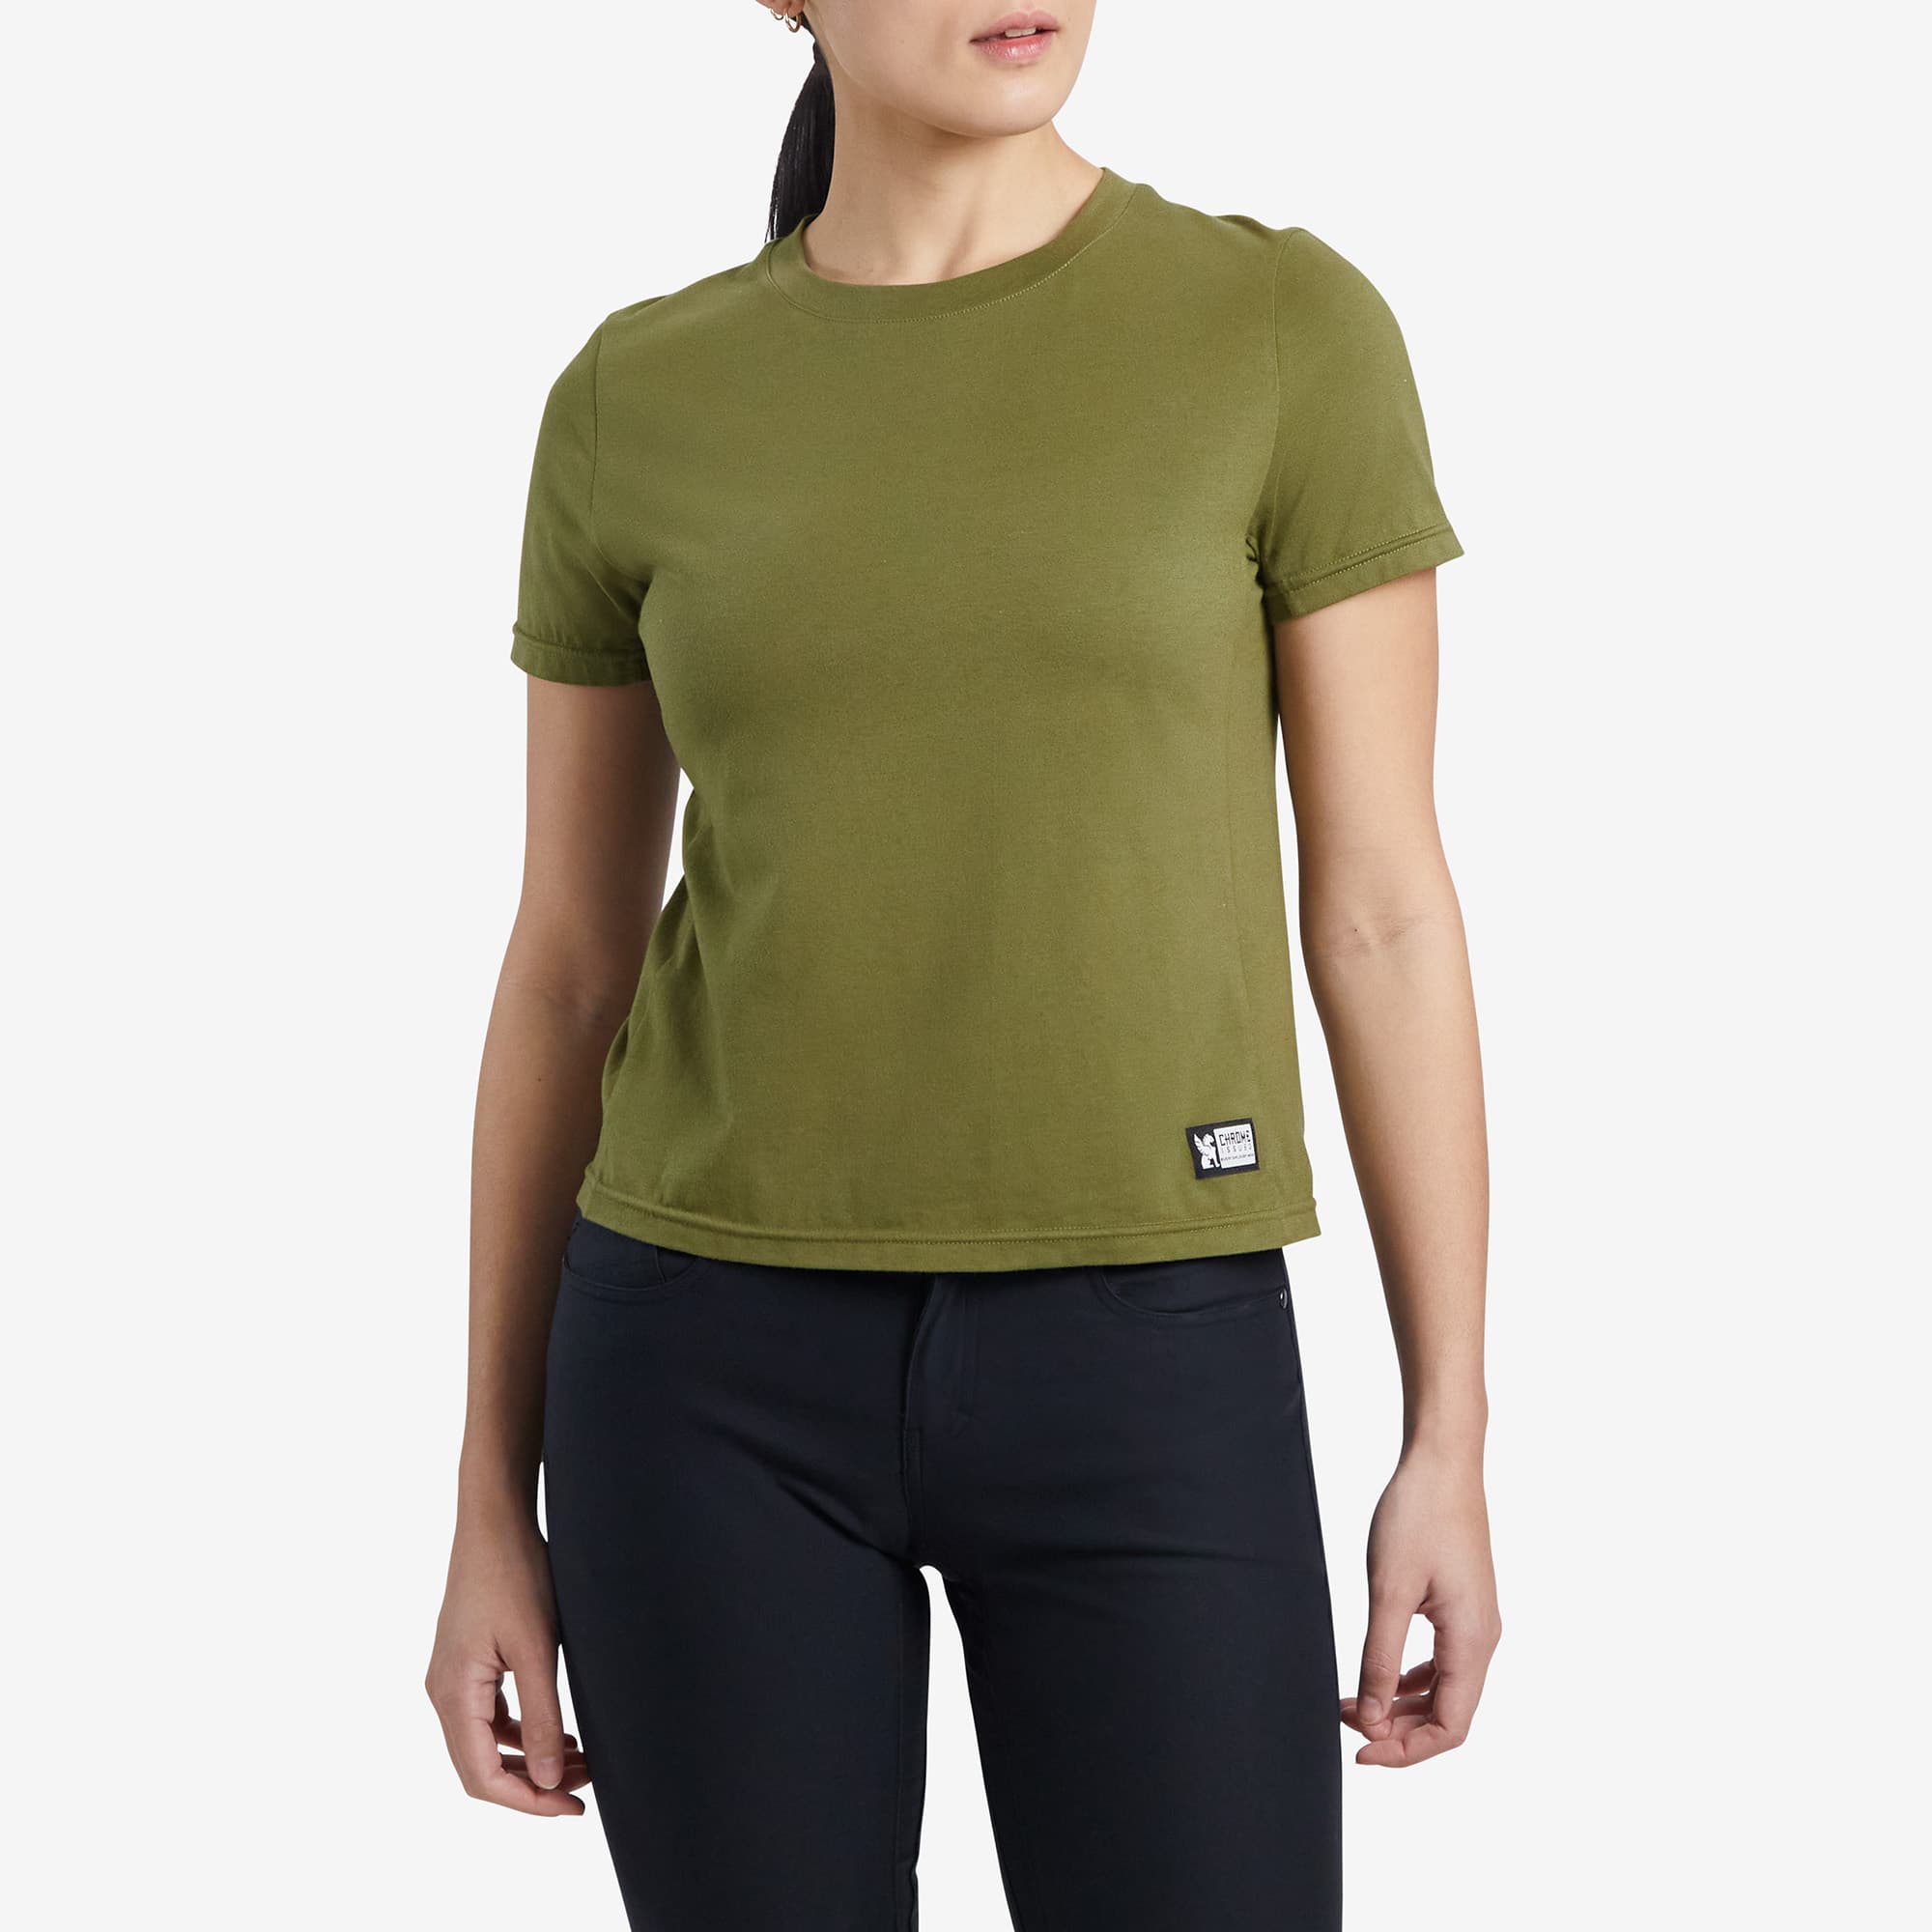 Women's Chrome basic T-Shirt green short sleeve worn by a woman #color_olive branch